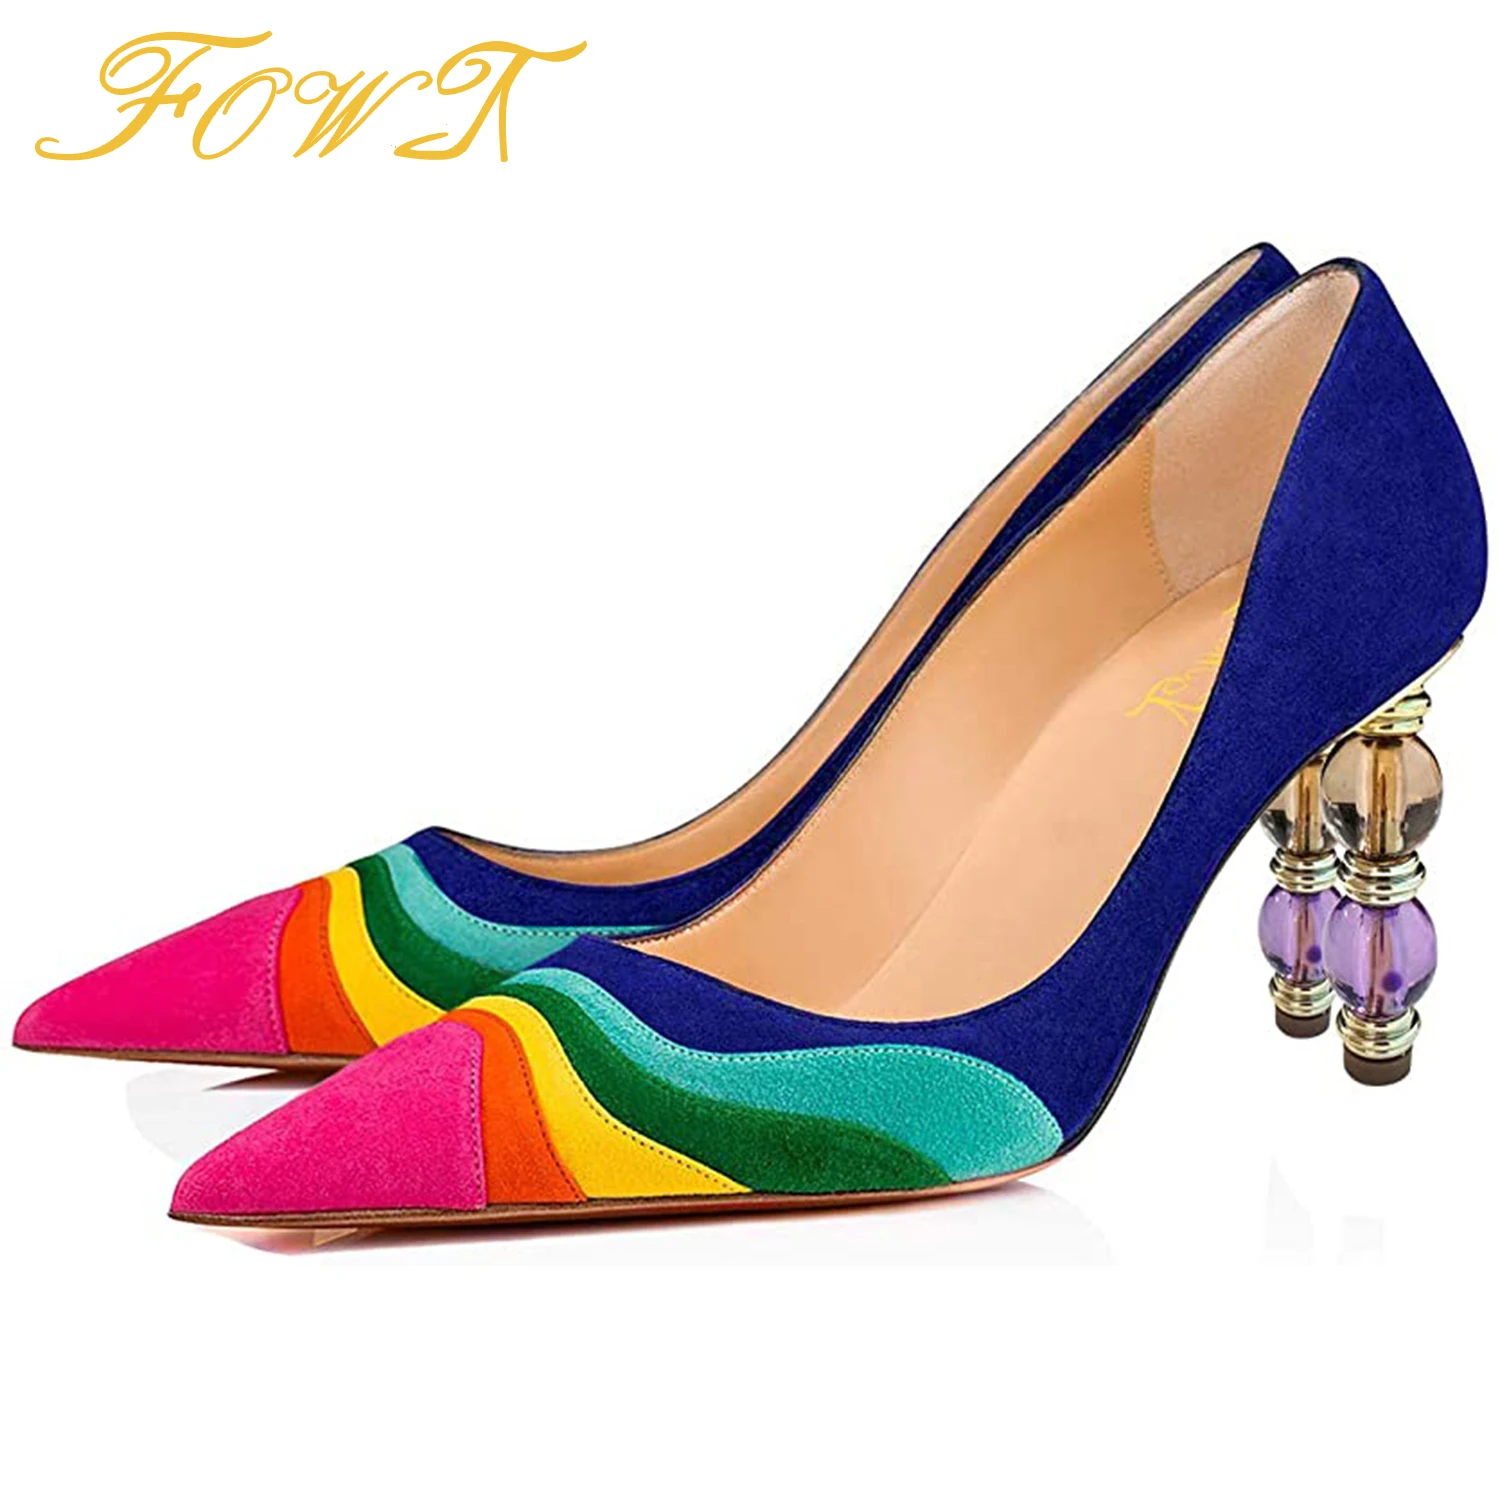 Womens Pointy Toe Slip On Leather Backless Kitten Heel Mules Dress Formal Shoes 